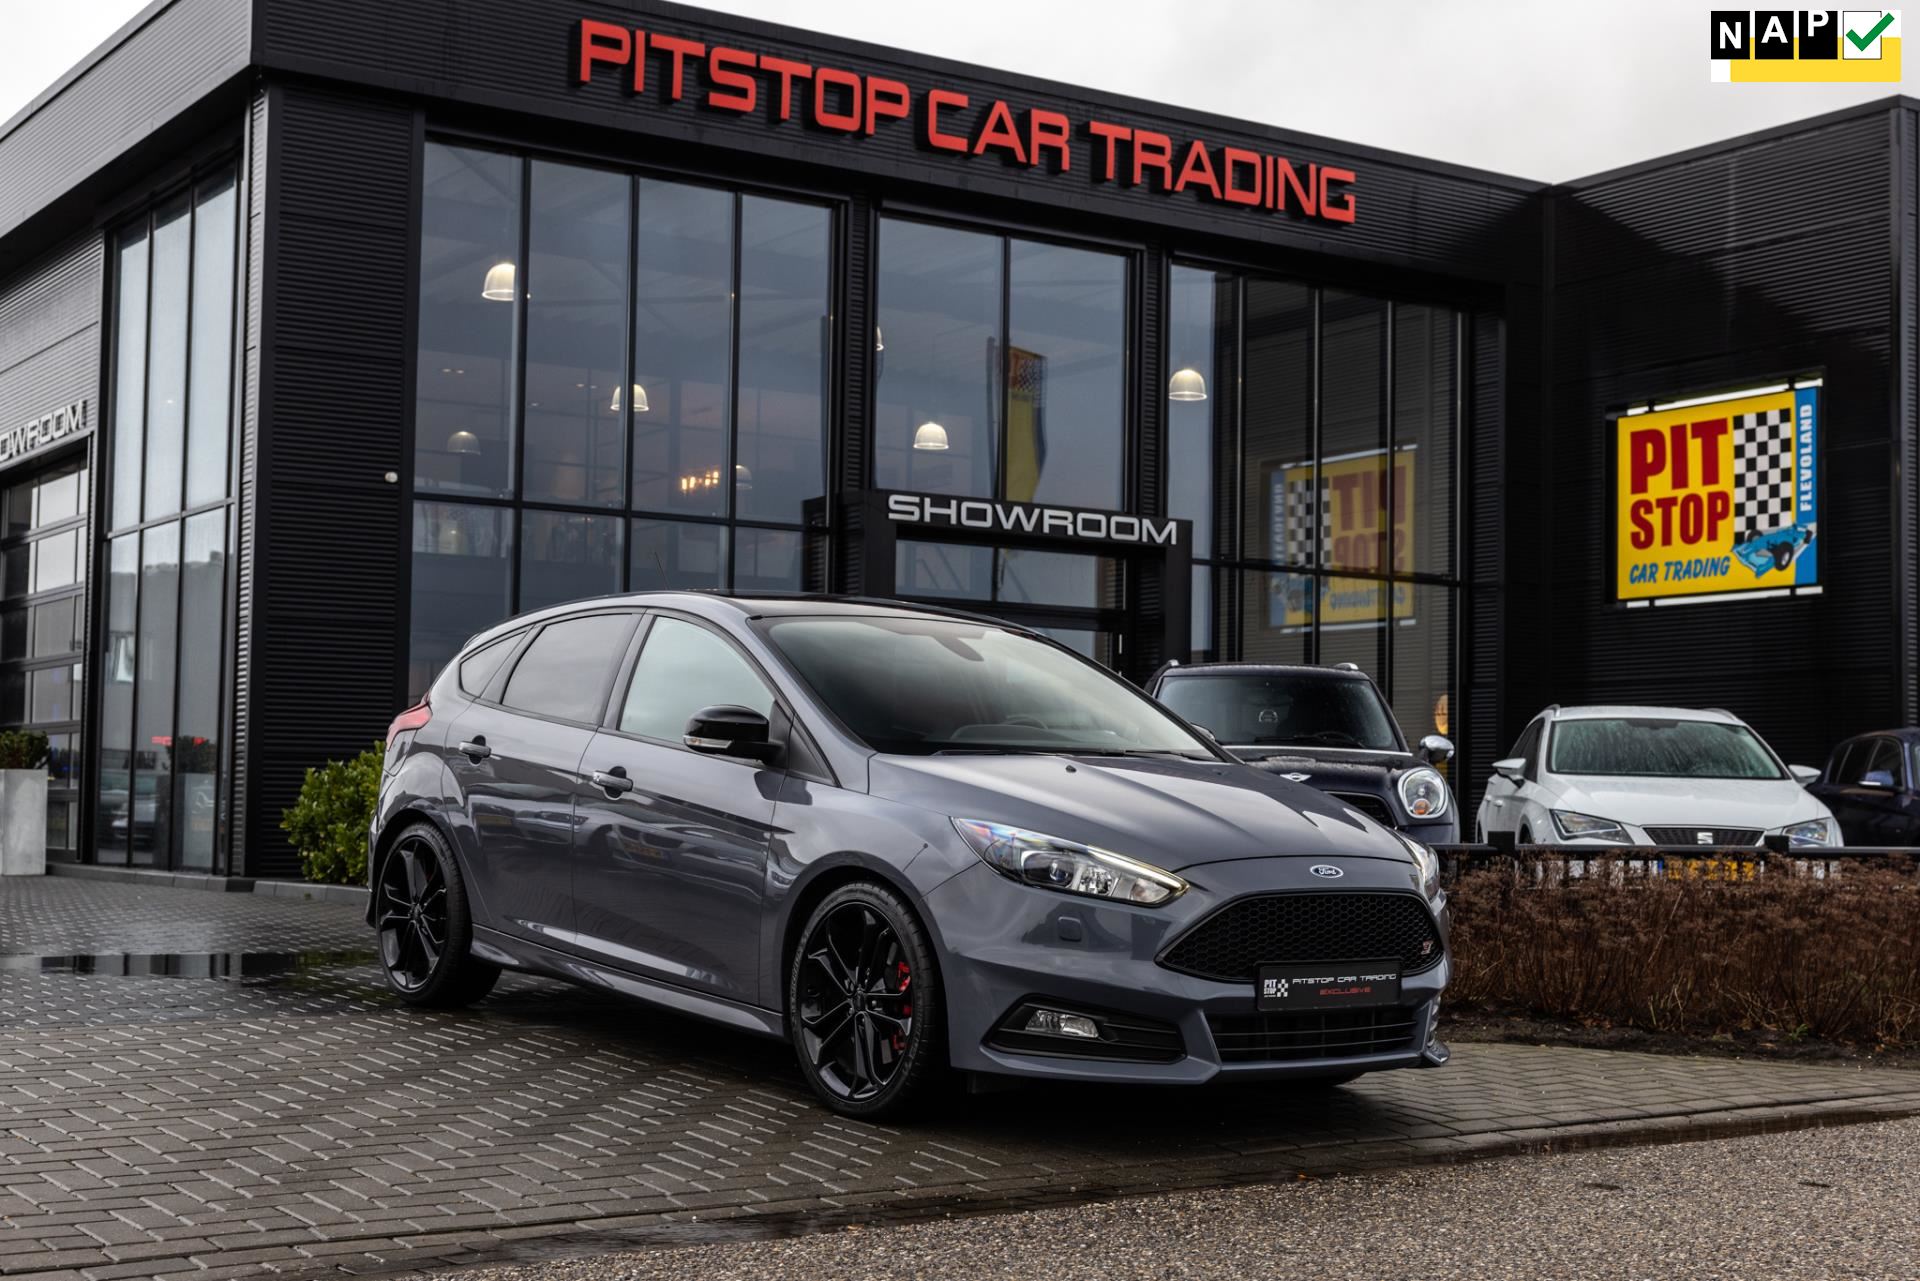 Ford FOCUS occasion - Pitstop Car Trading B.V.